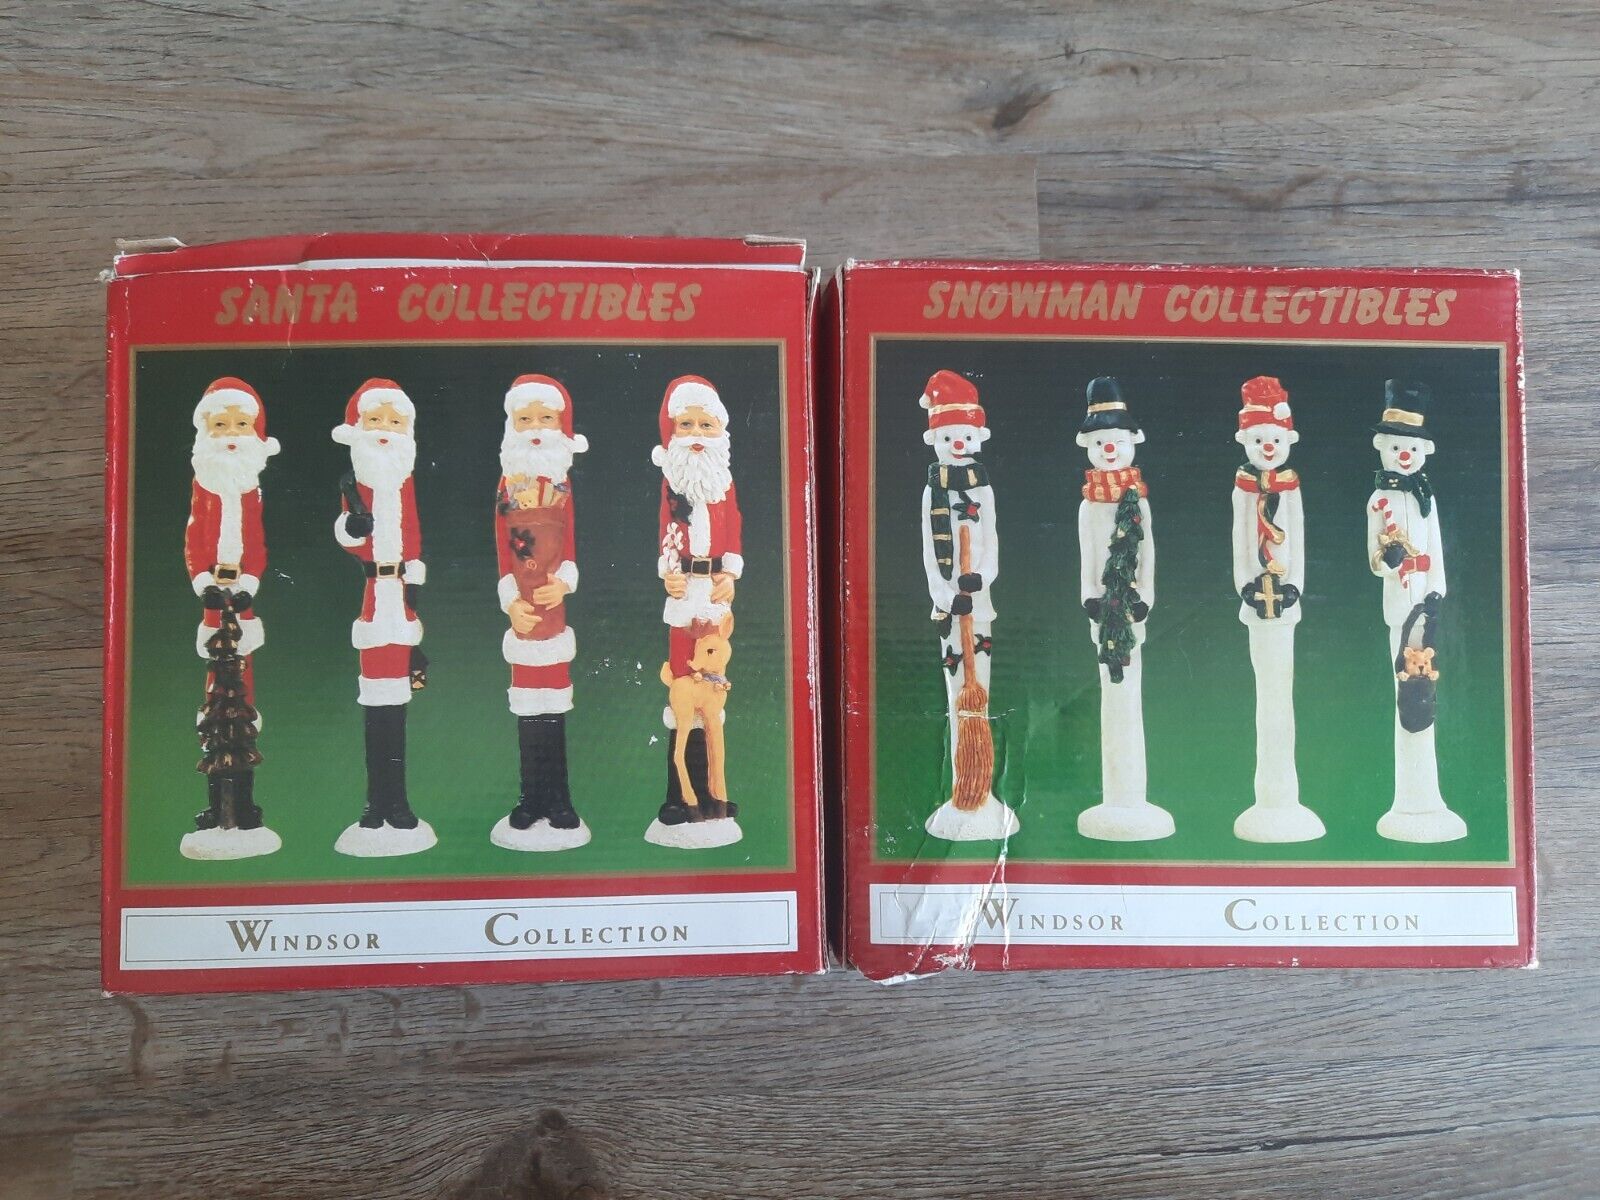 Windsor Collection Christmas Figurines Set of 8 W/Boxes, Santa & Snowmen